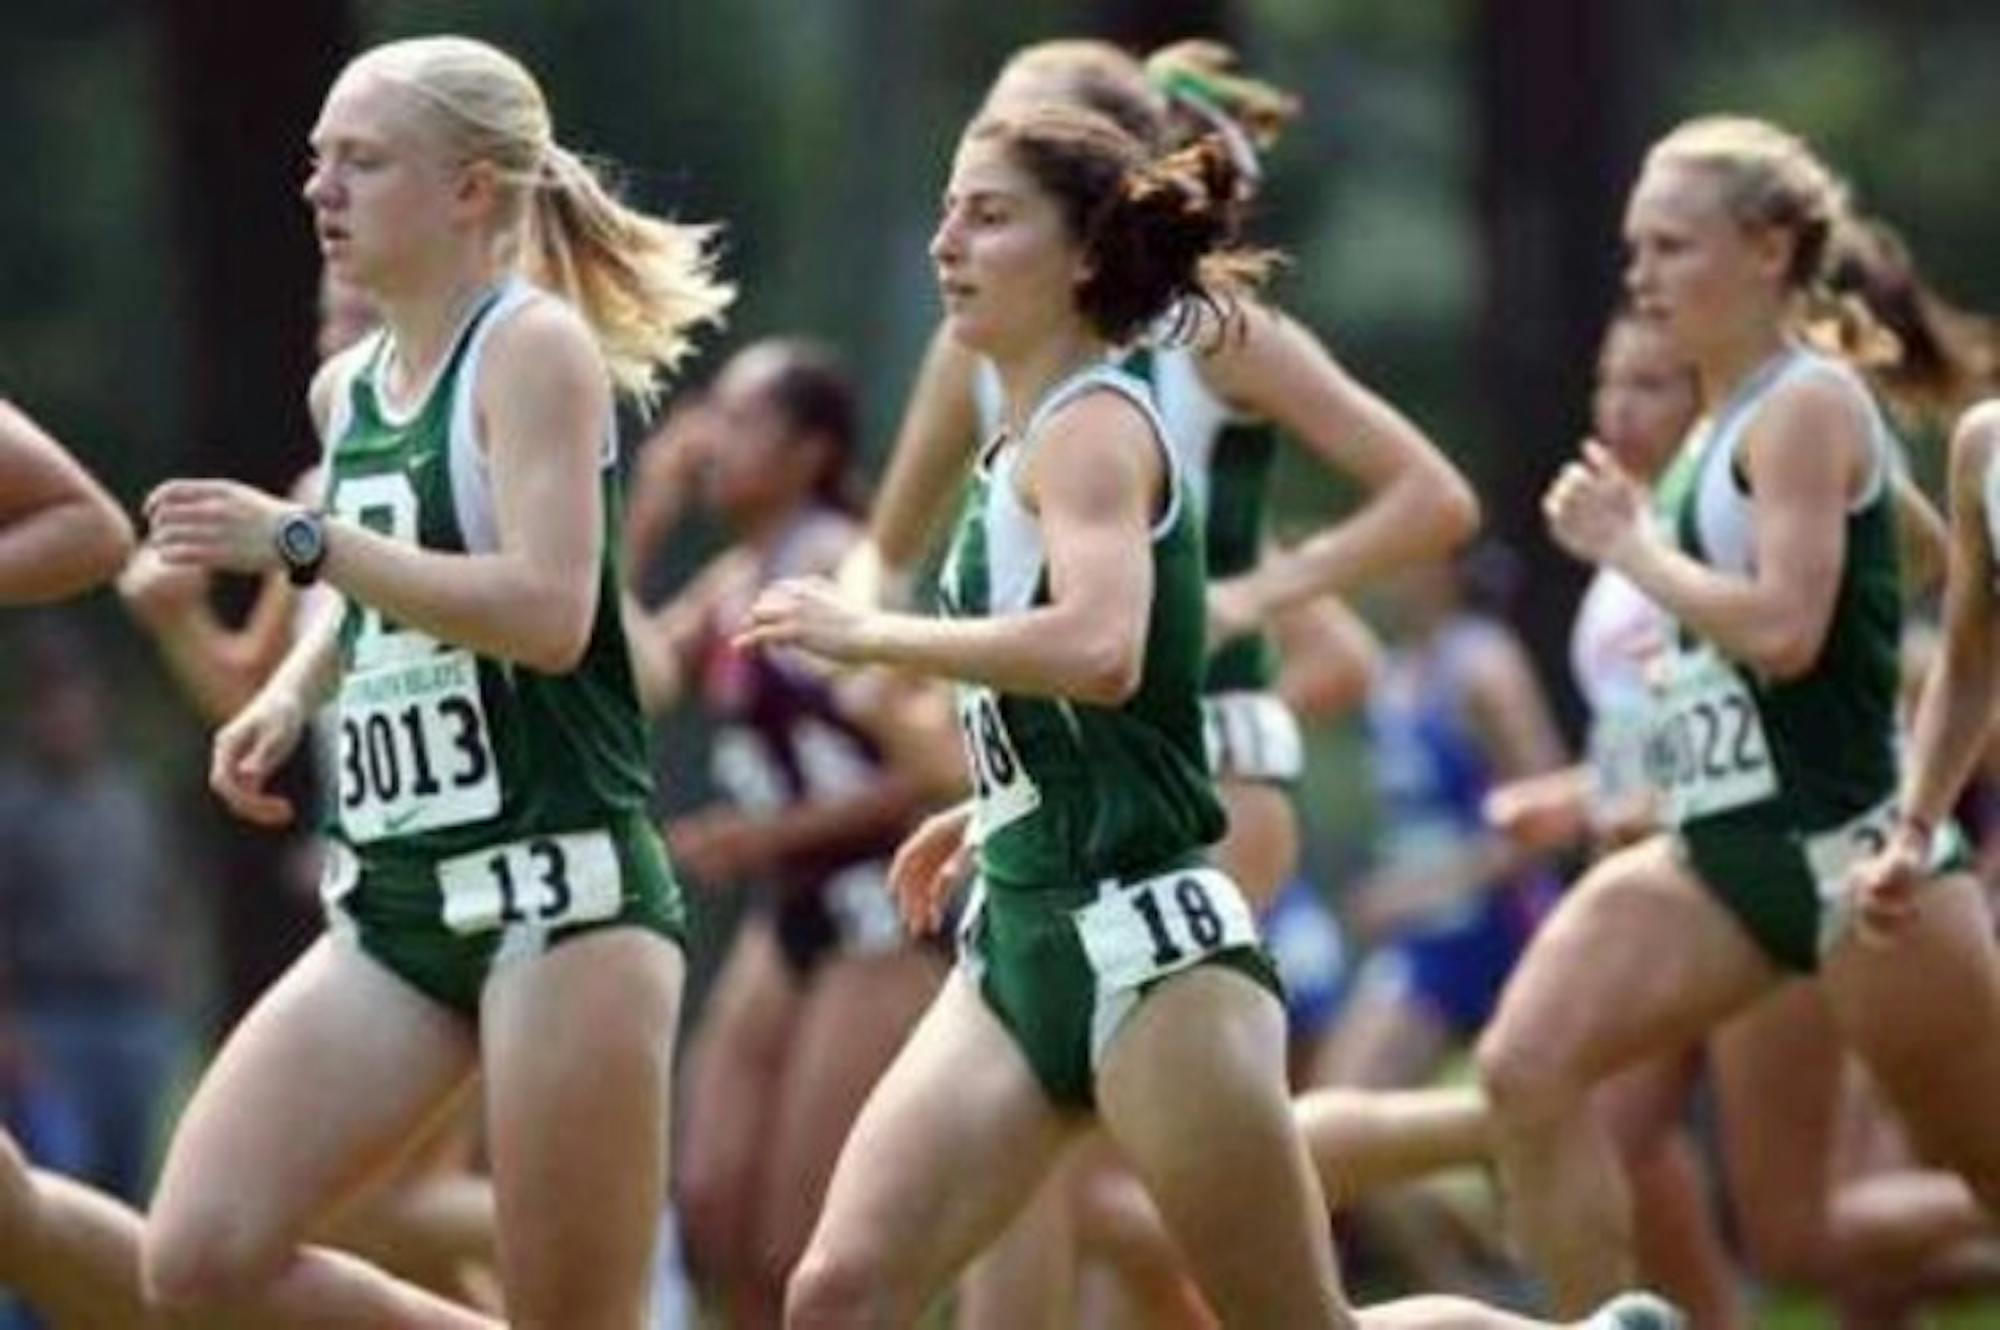 The cross country squads will face off against Ivy competition this weekend.